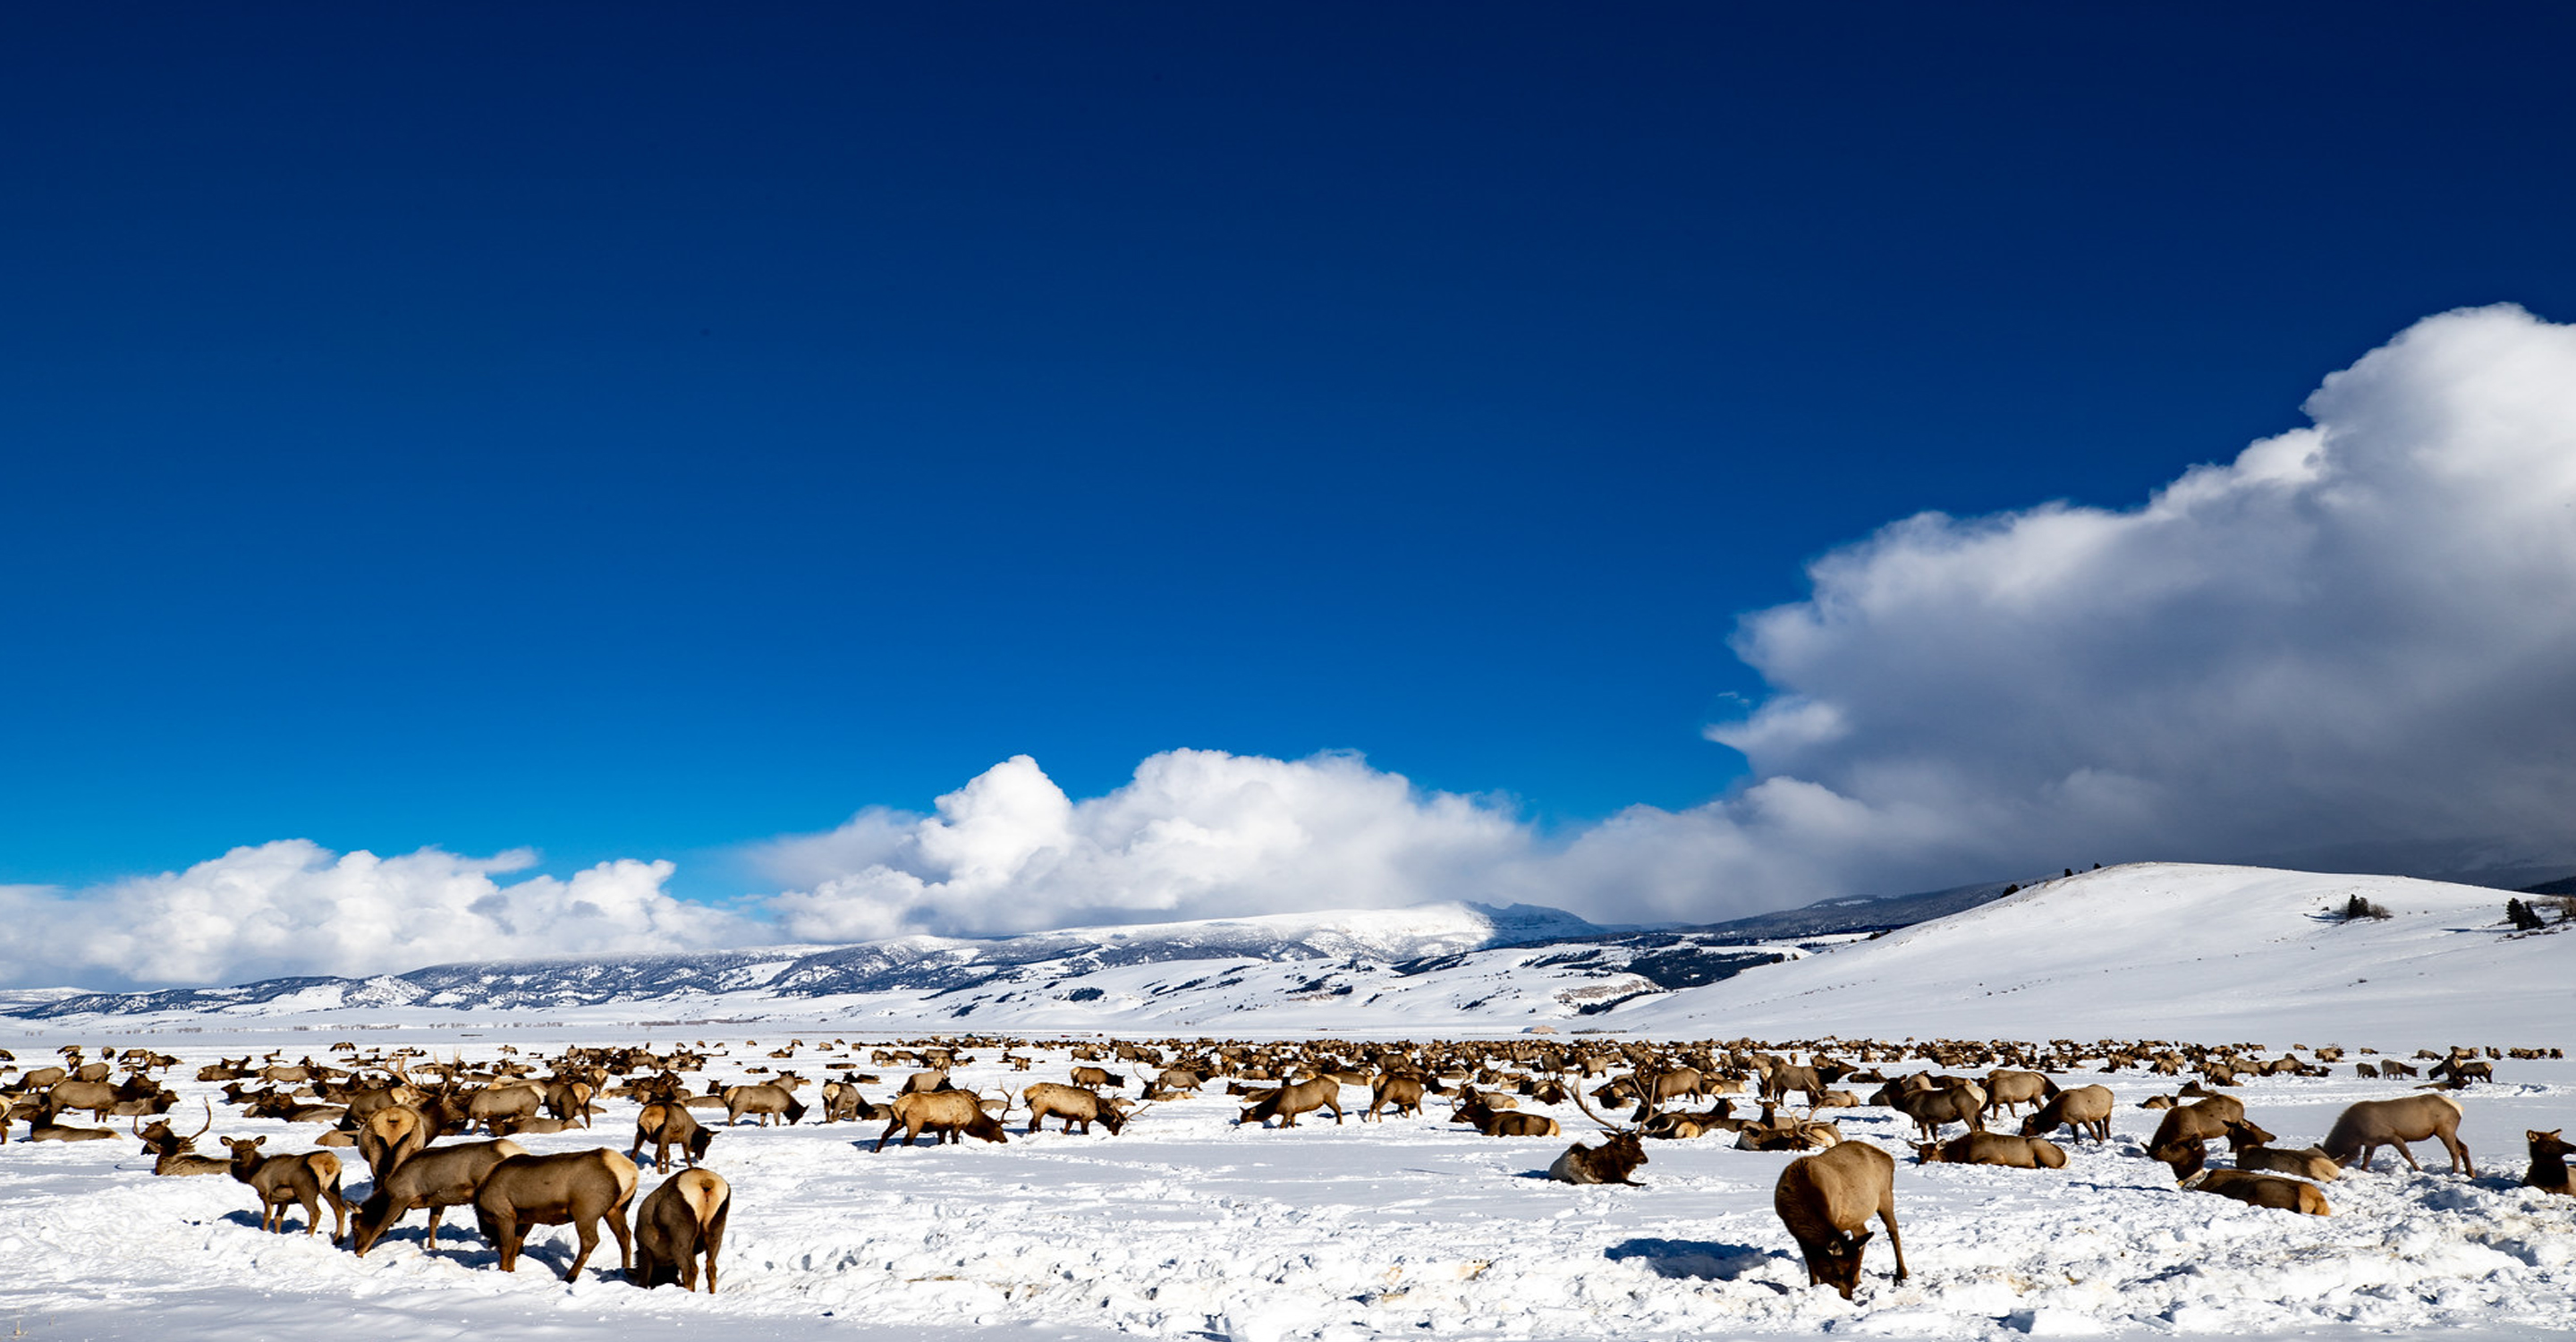 A large herd of elk graze in a snowy field in Grand Teton National Park, United States